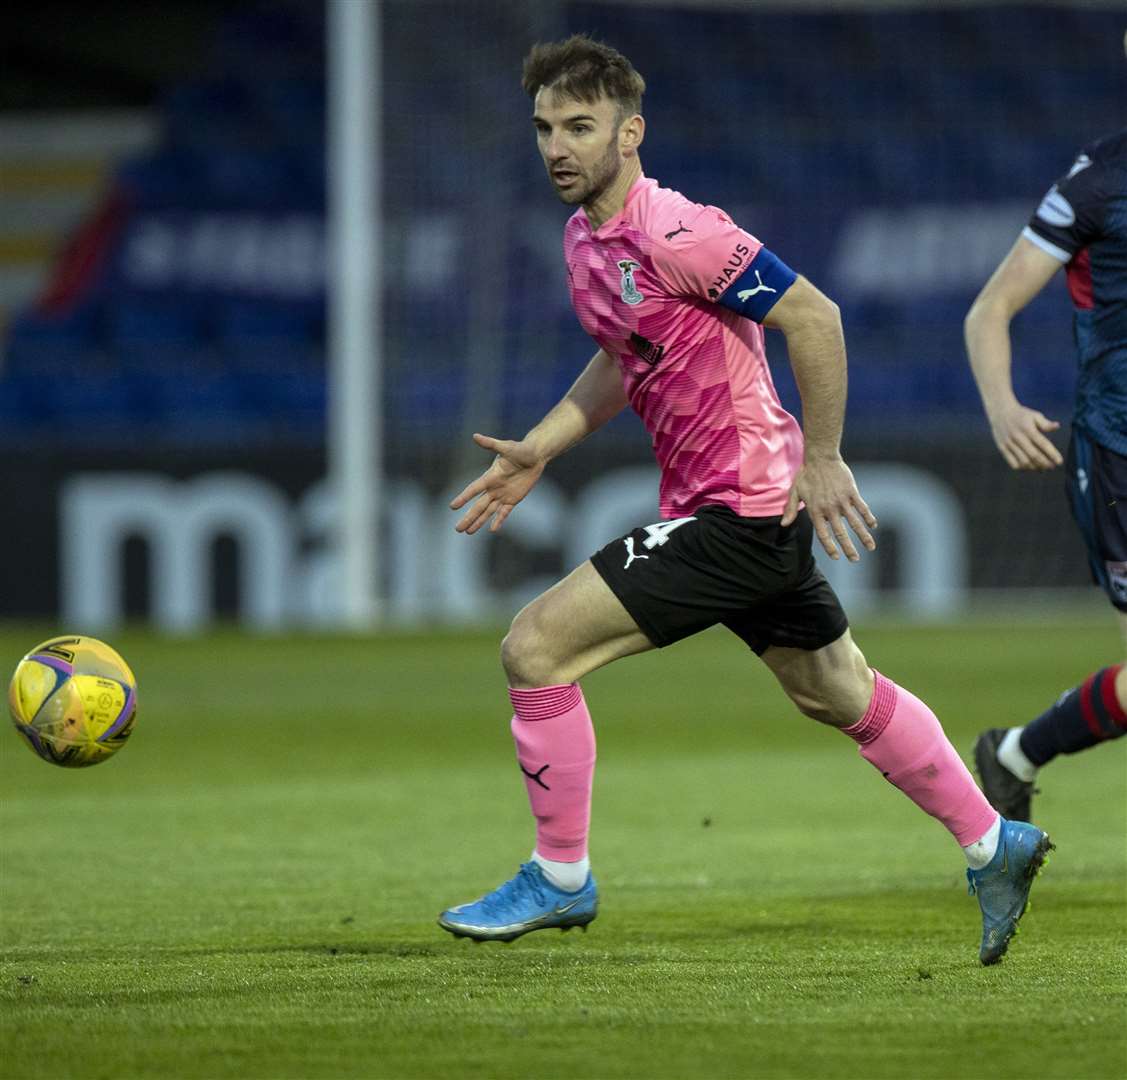 Picture - Ken Macpherson, Inverness. Scottish Cup 3rd Round. Ross County(1) v Inverness CT(3). 02.04.21. ICT’s Sean Welsh.